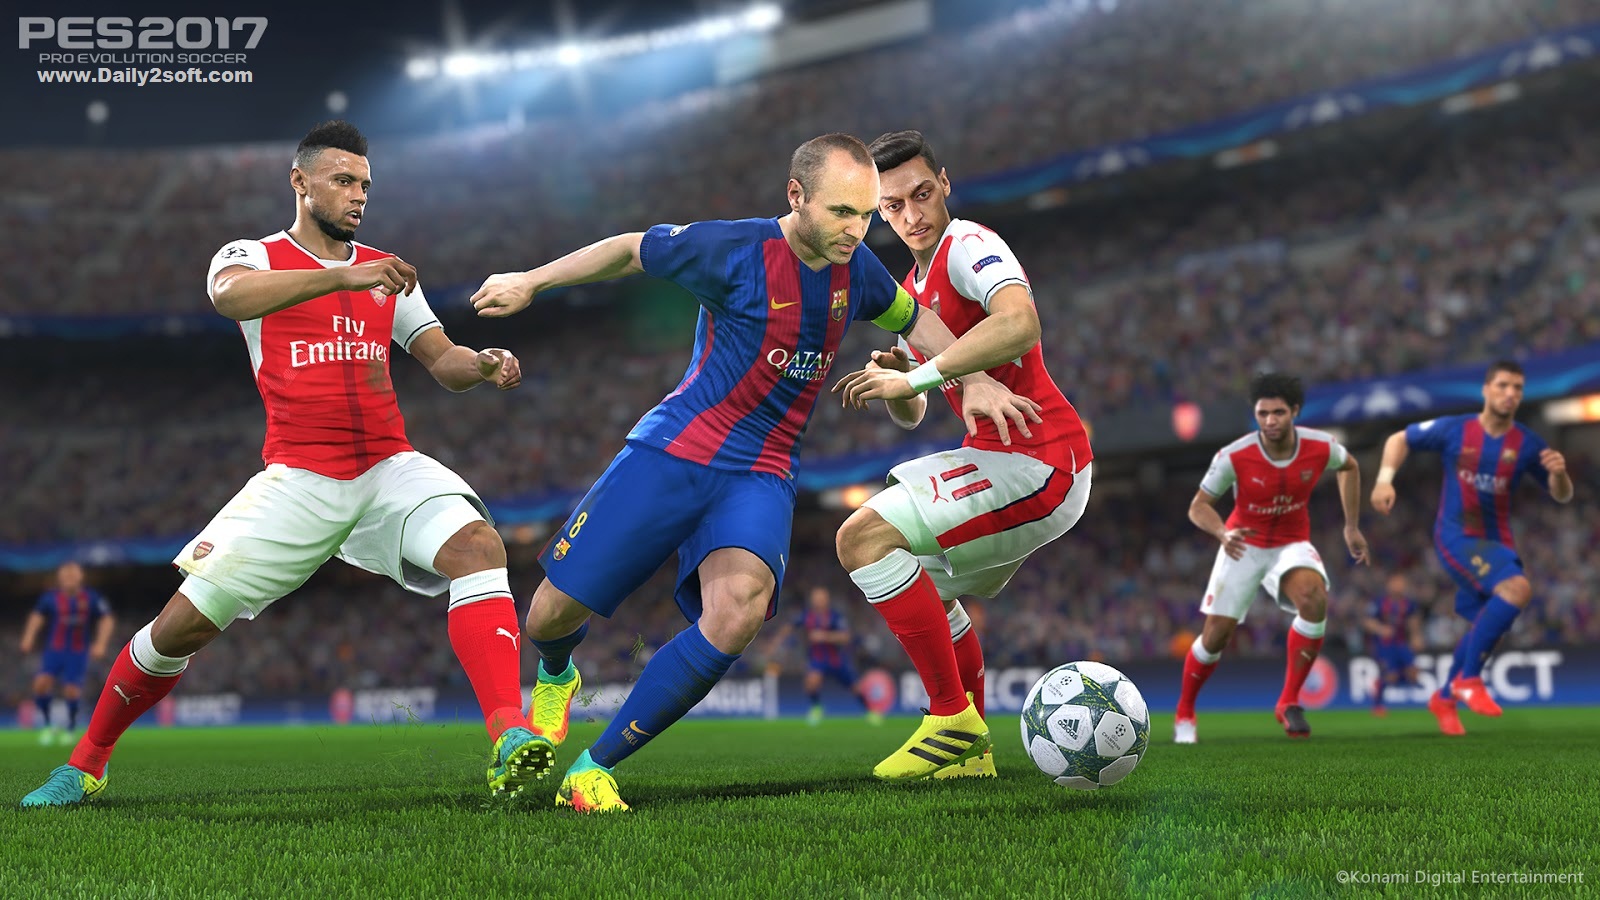 PES 2017 Full Version Download For PC Free Cracked Here